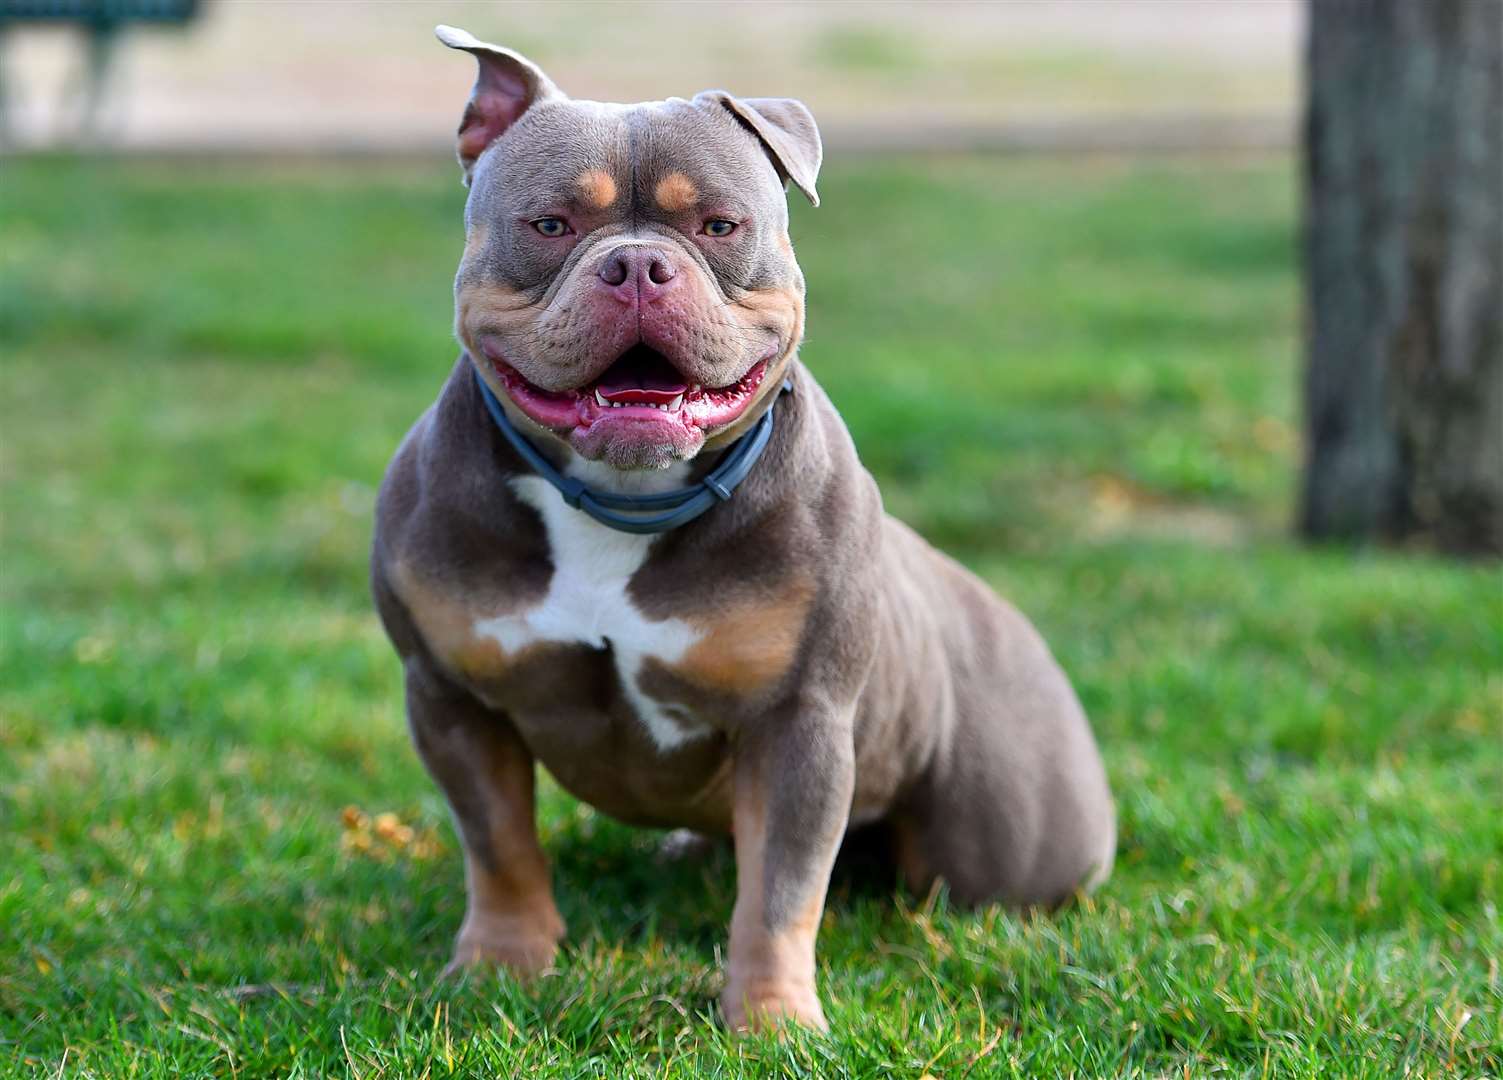 The XL Bully breed is now subject to tough new rules. Image: iStock.